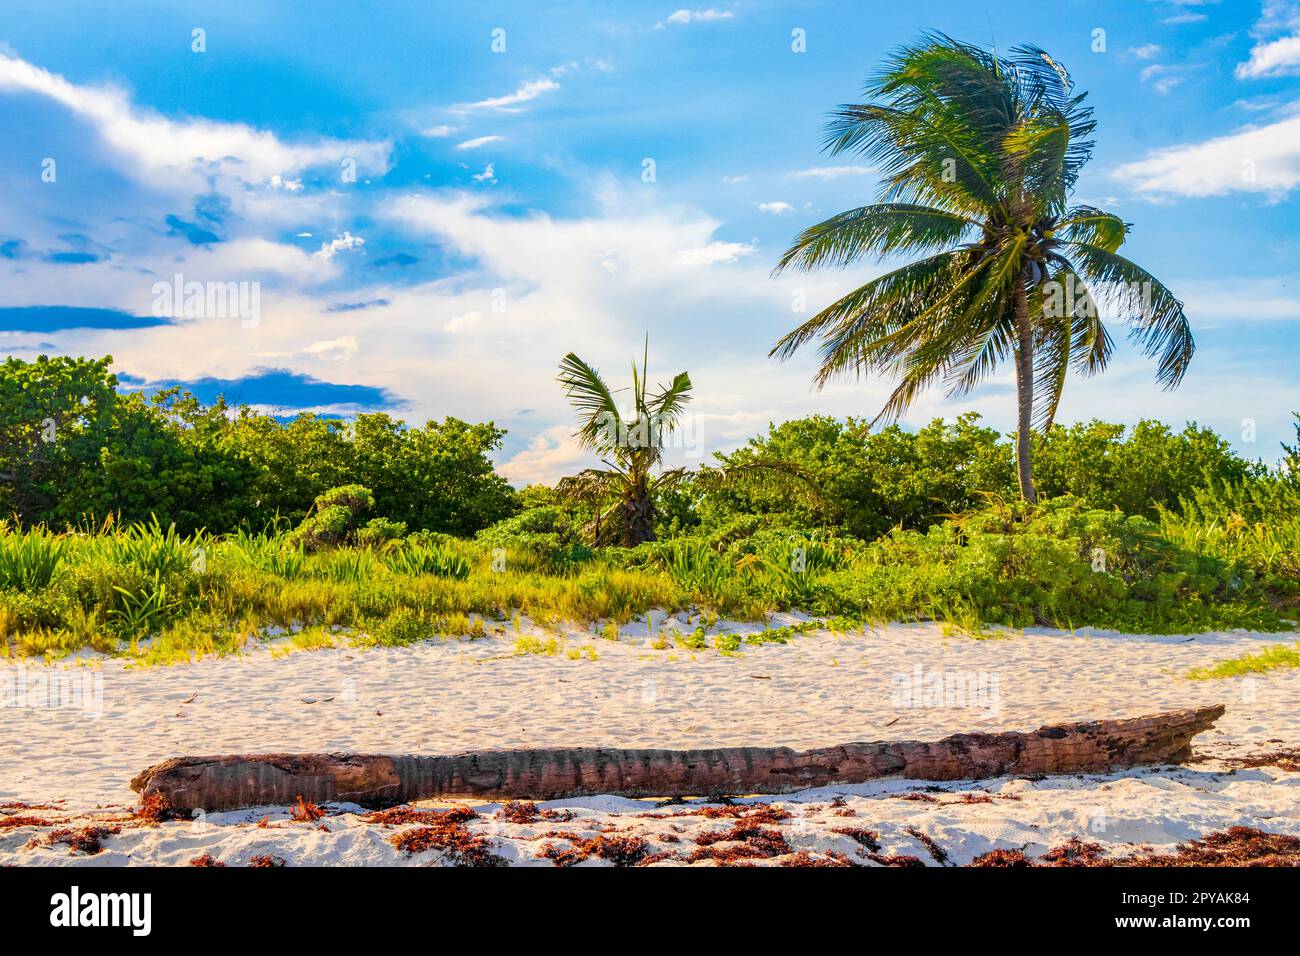 Beautiful Caribbean beach with washed up tree trunk wood Mexico. Stock Photo